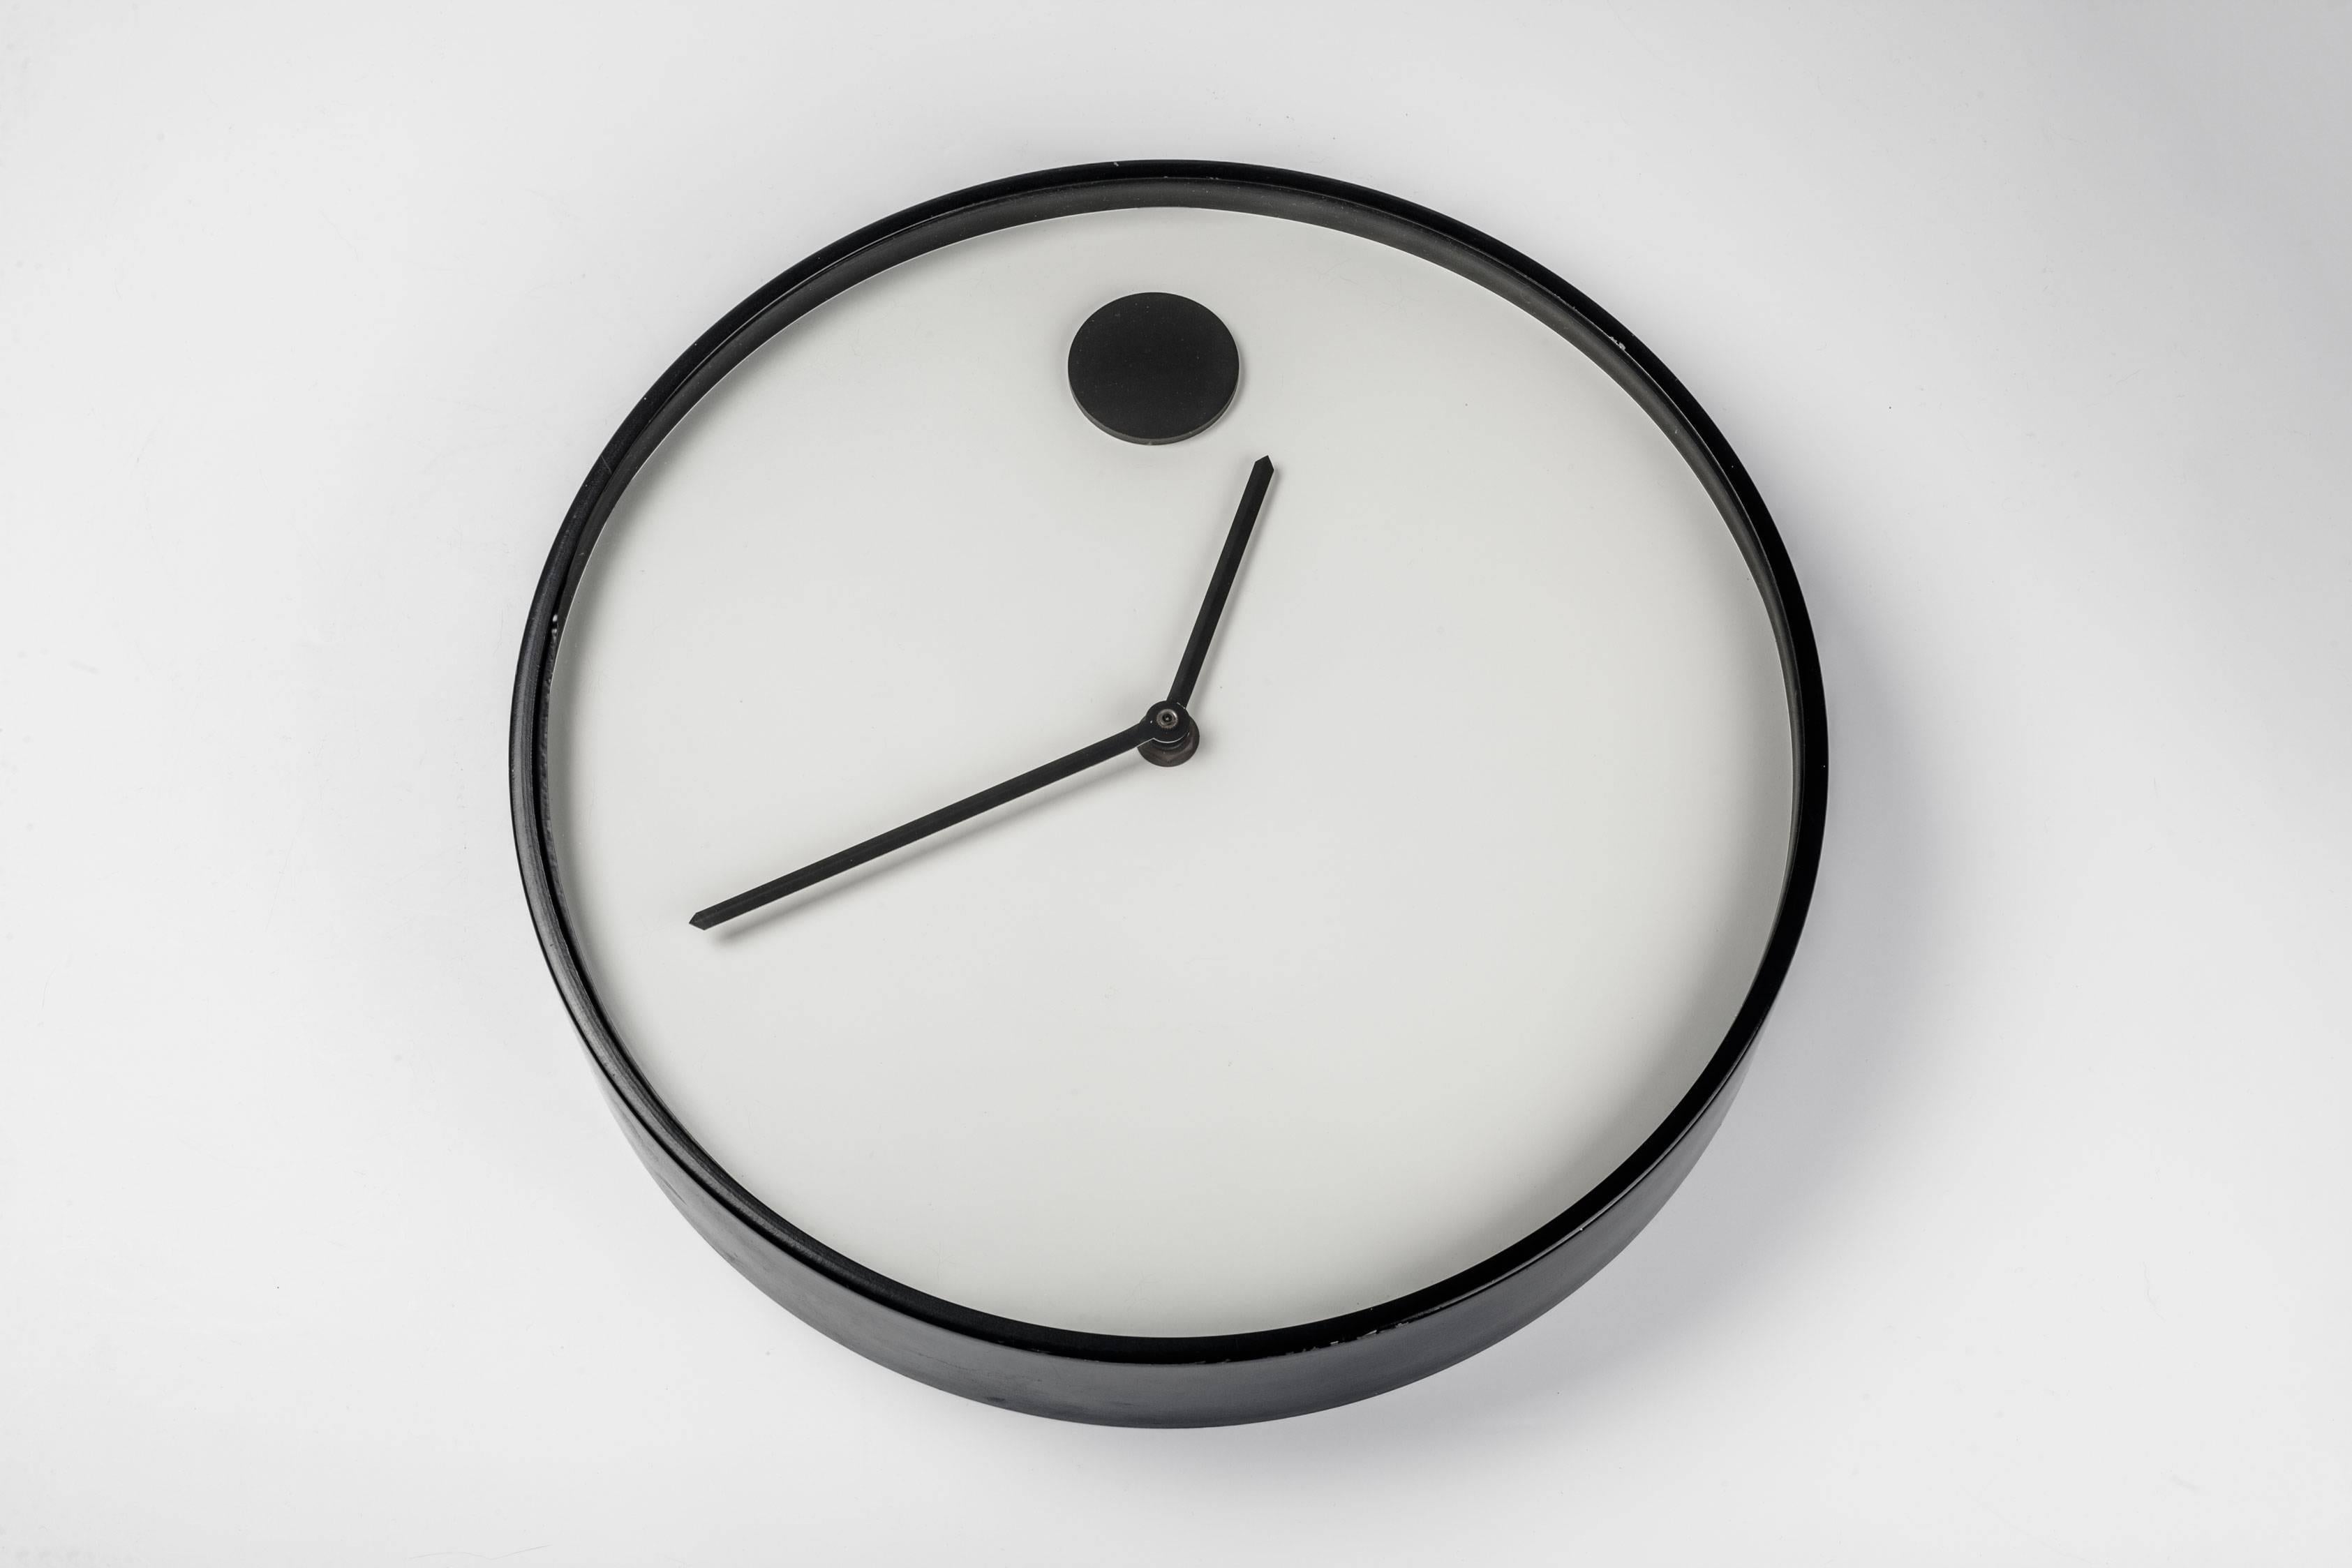 Black and white wall clock, part of the MoMA design collection, 1970. Designed by Nathan George Horwitt for Howard Miller. Metal lacquered case and glass front. A wall clock version of Horwitt's previous watch design for Movado. 

Nathan George